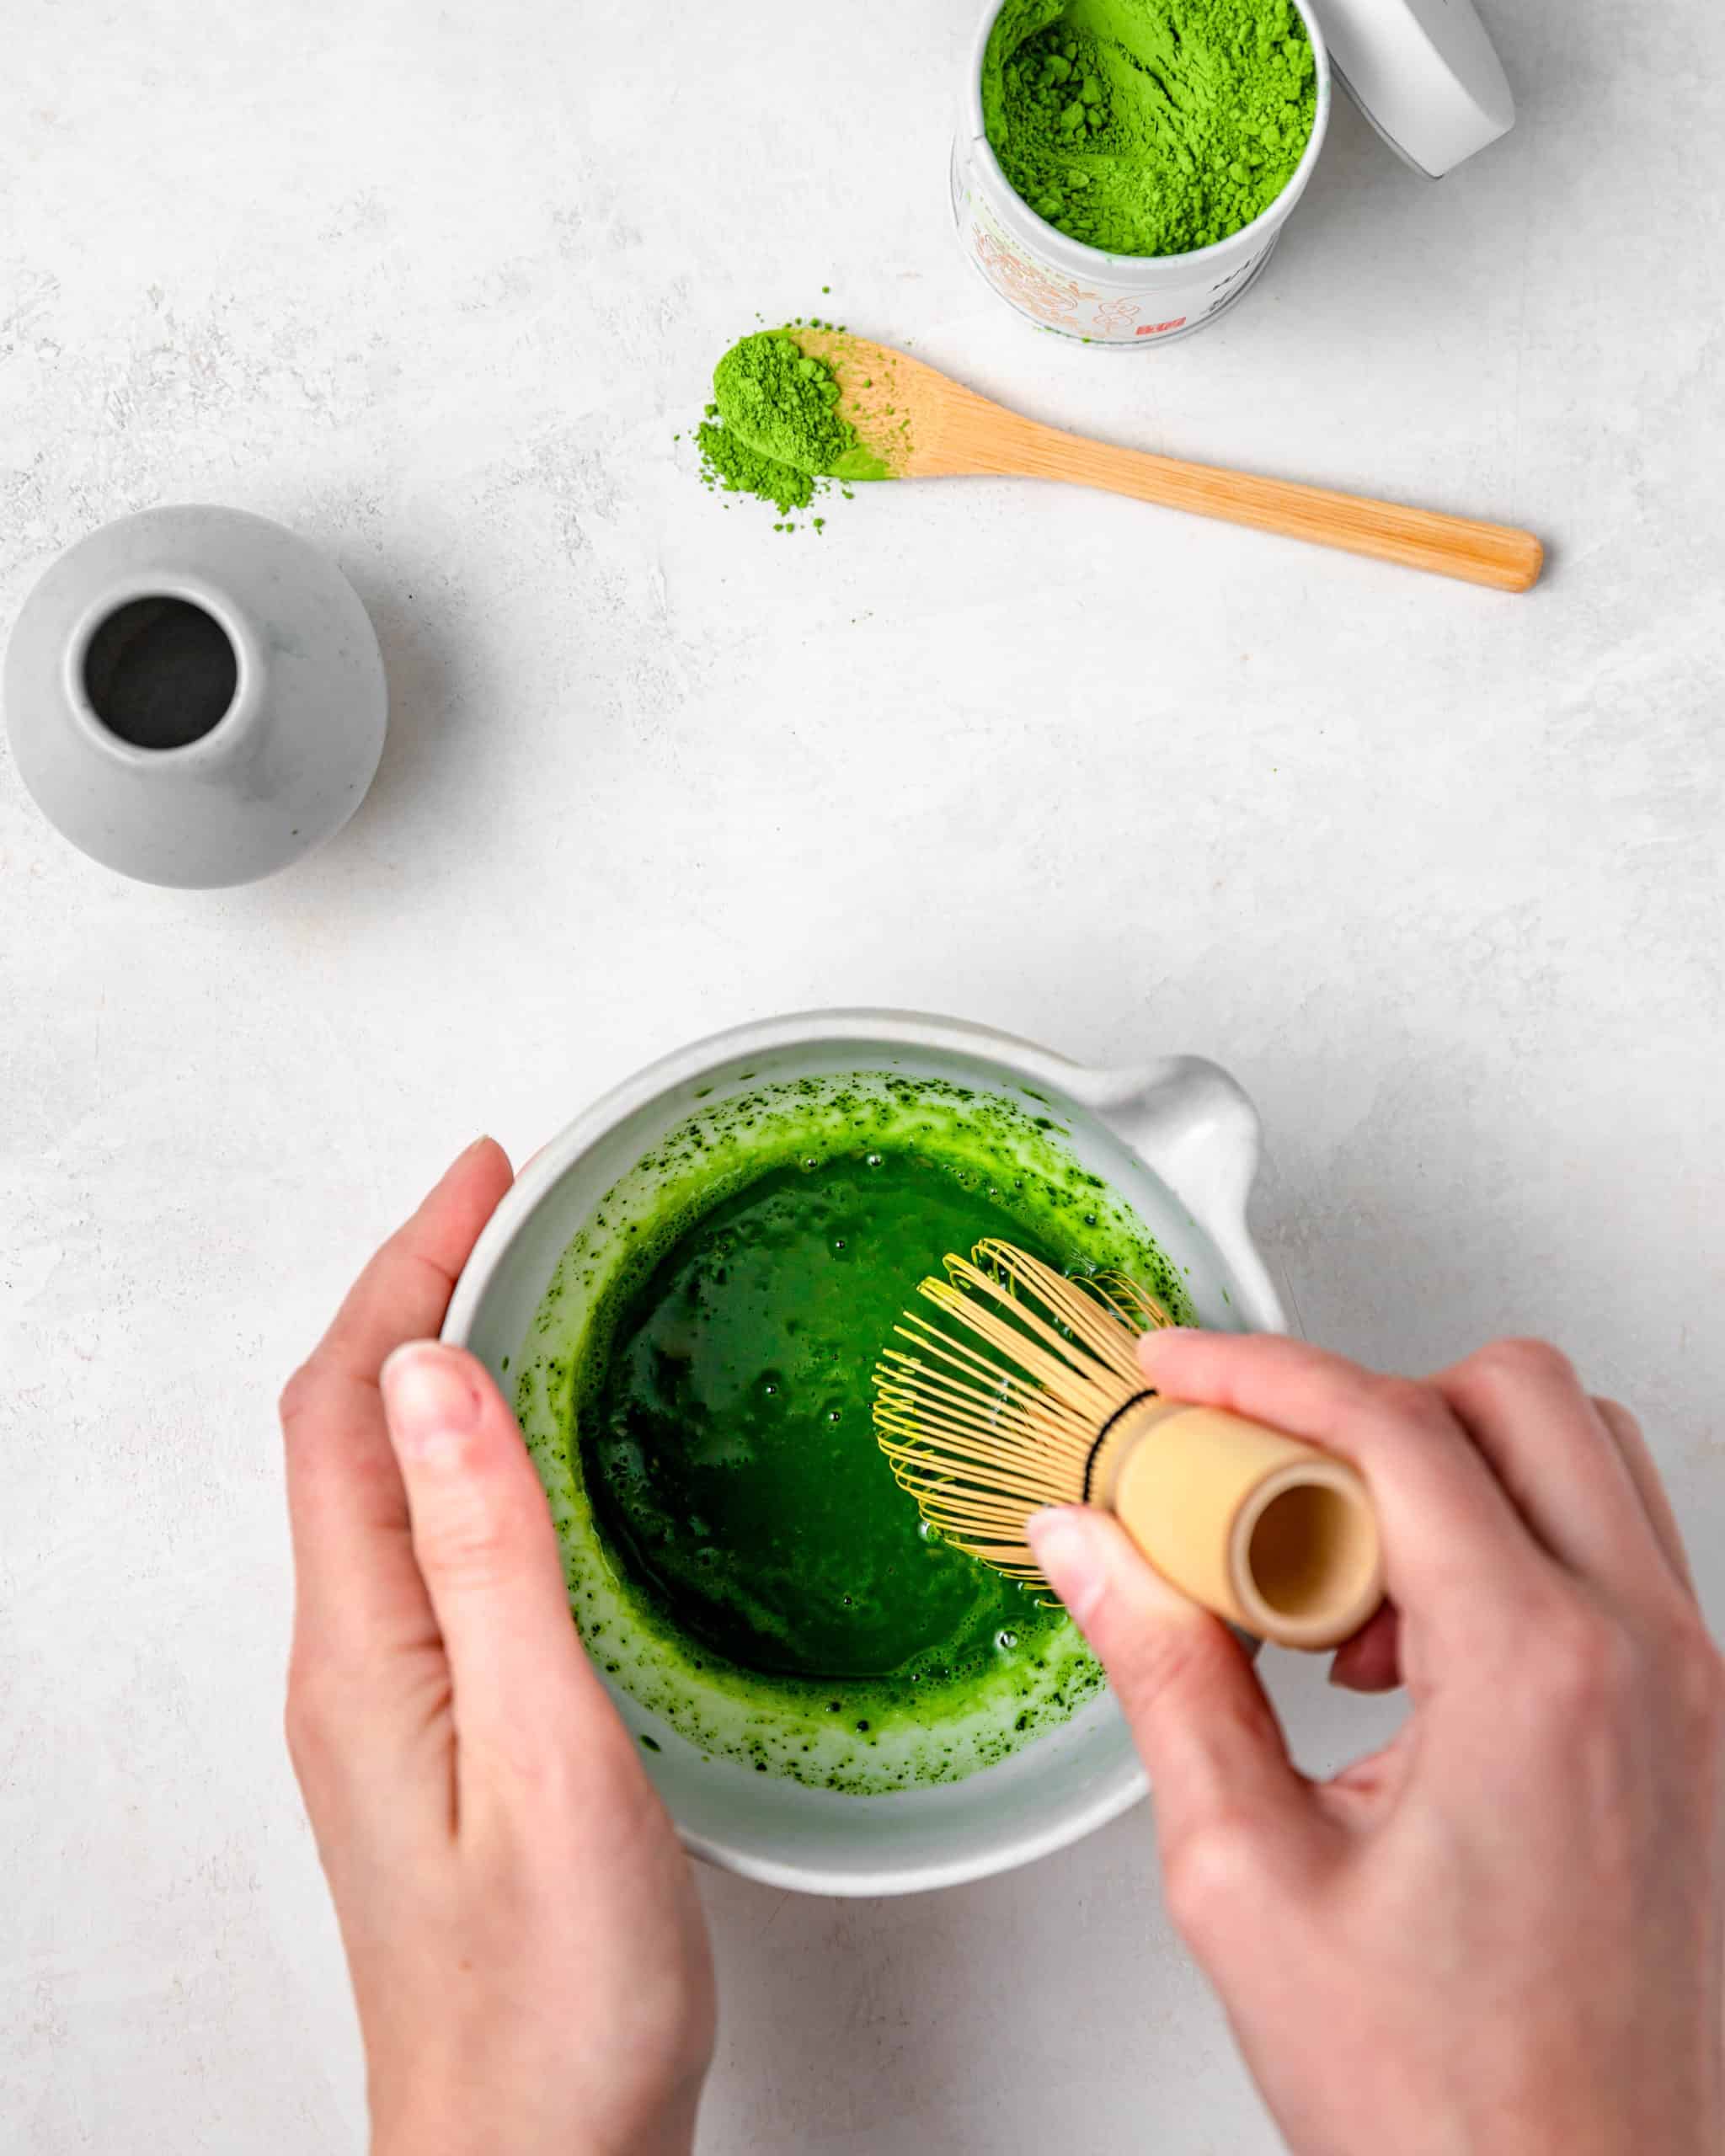 Mixing Matcha with hot water